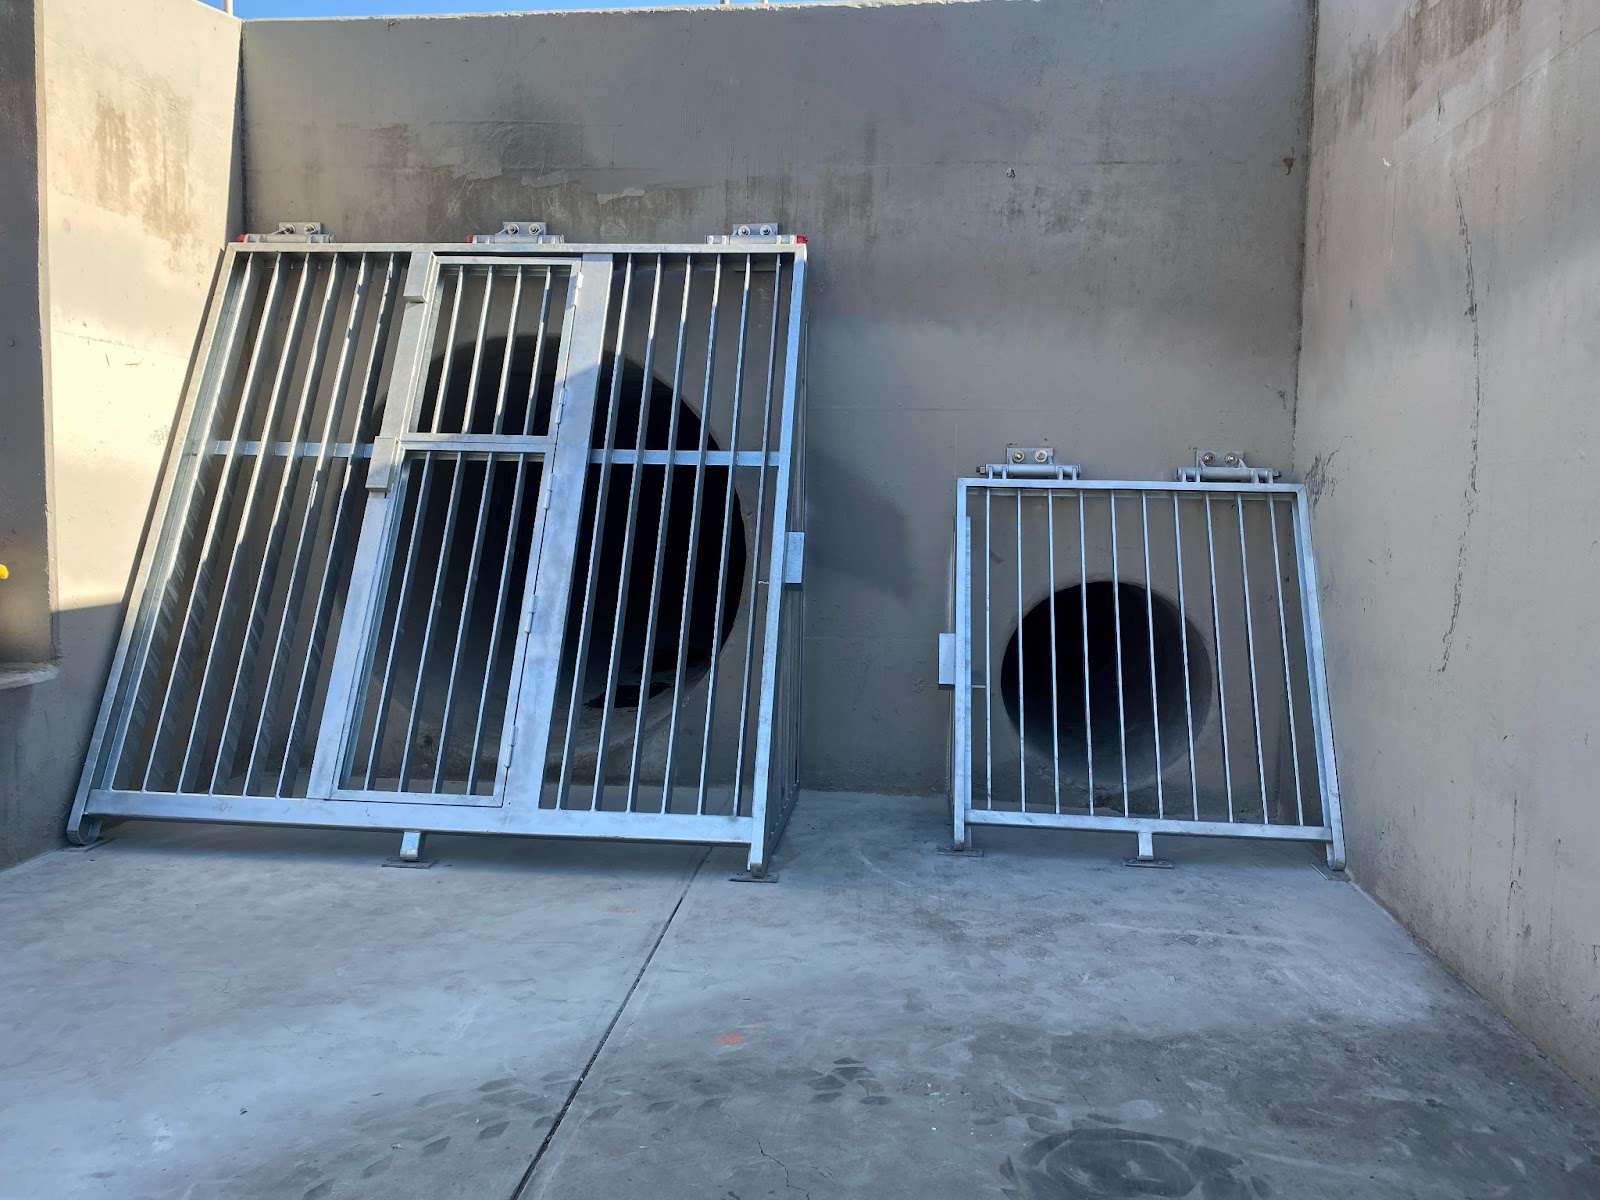 A photo of a large outlet and a small outlet of a storm drain, covered by nice new metal gates.